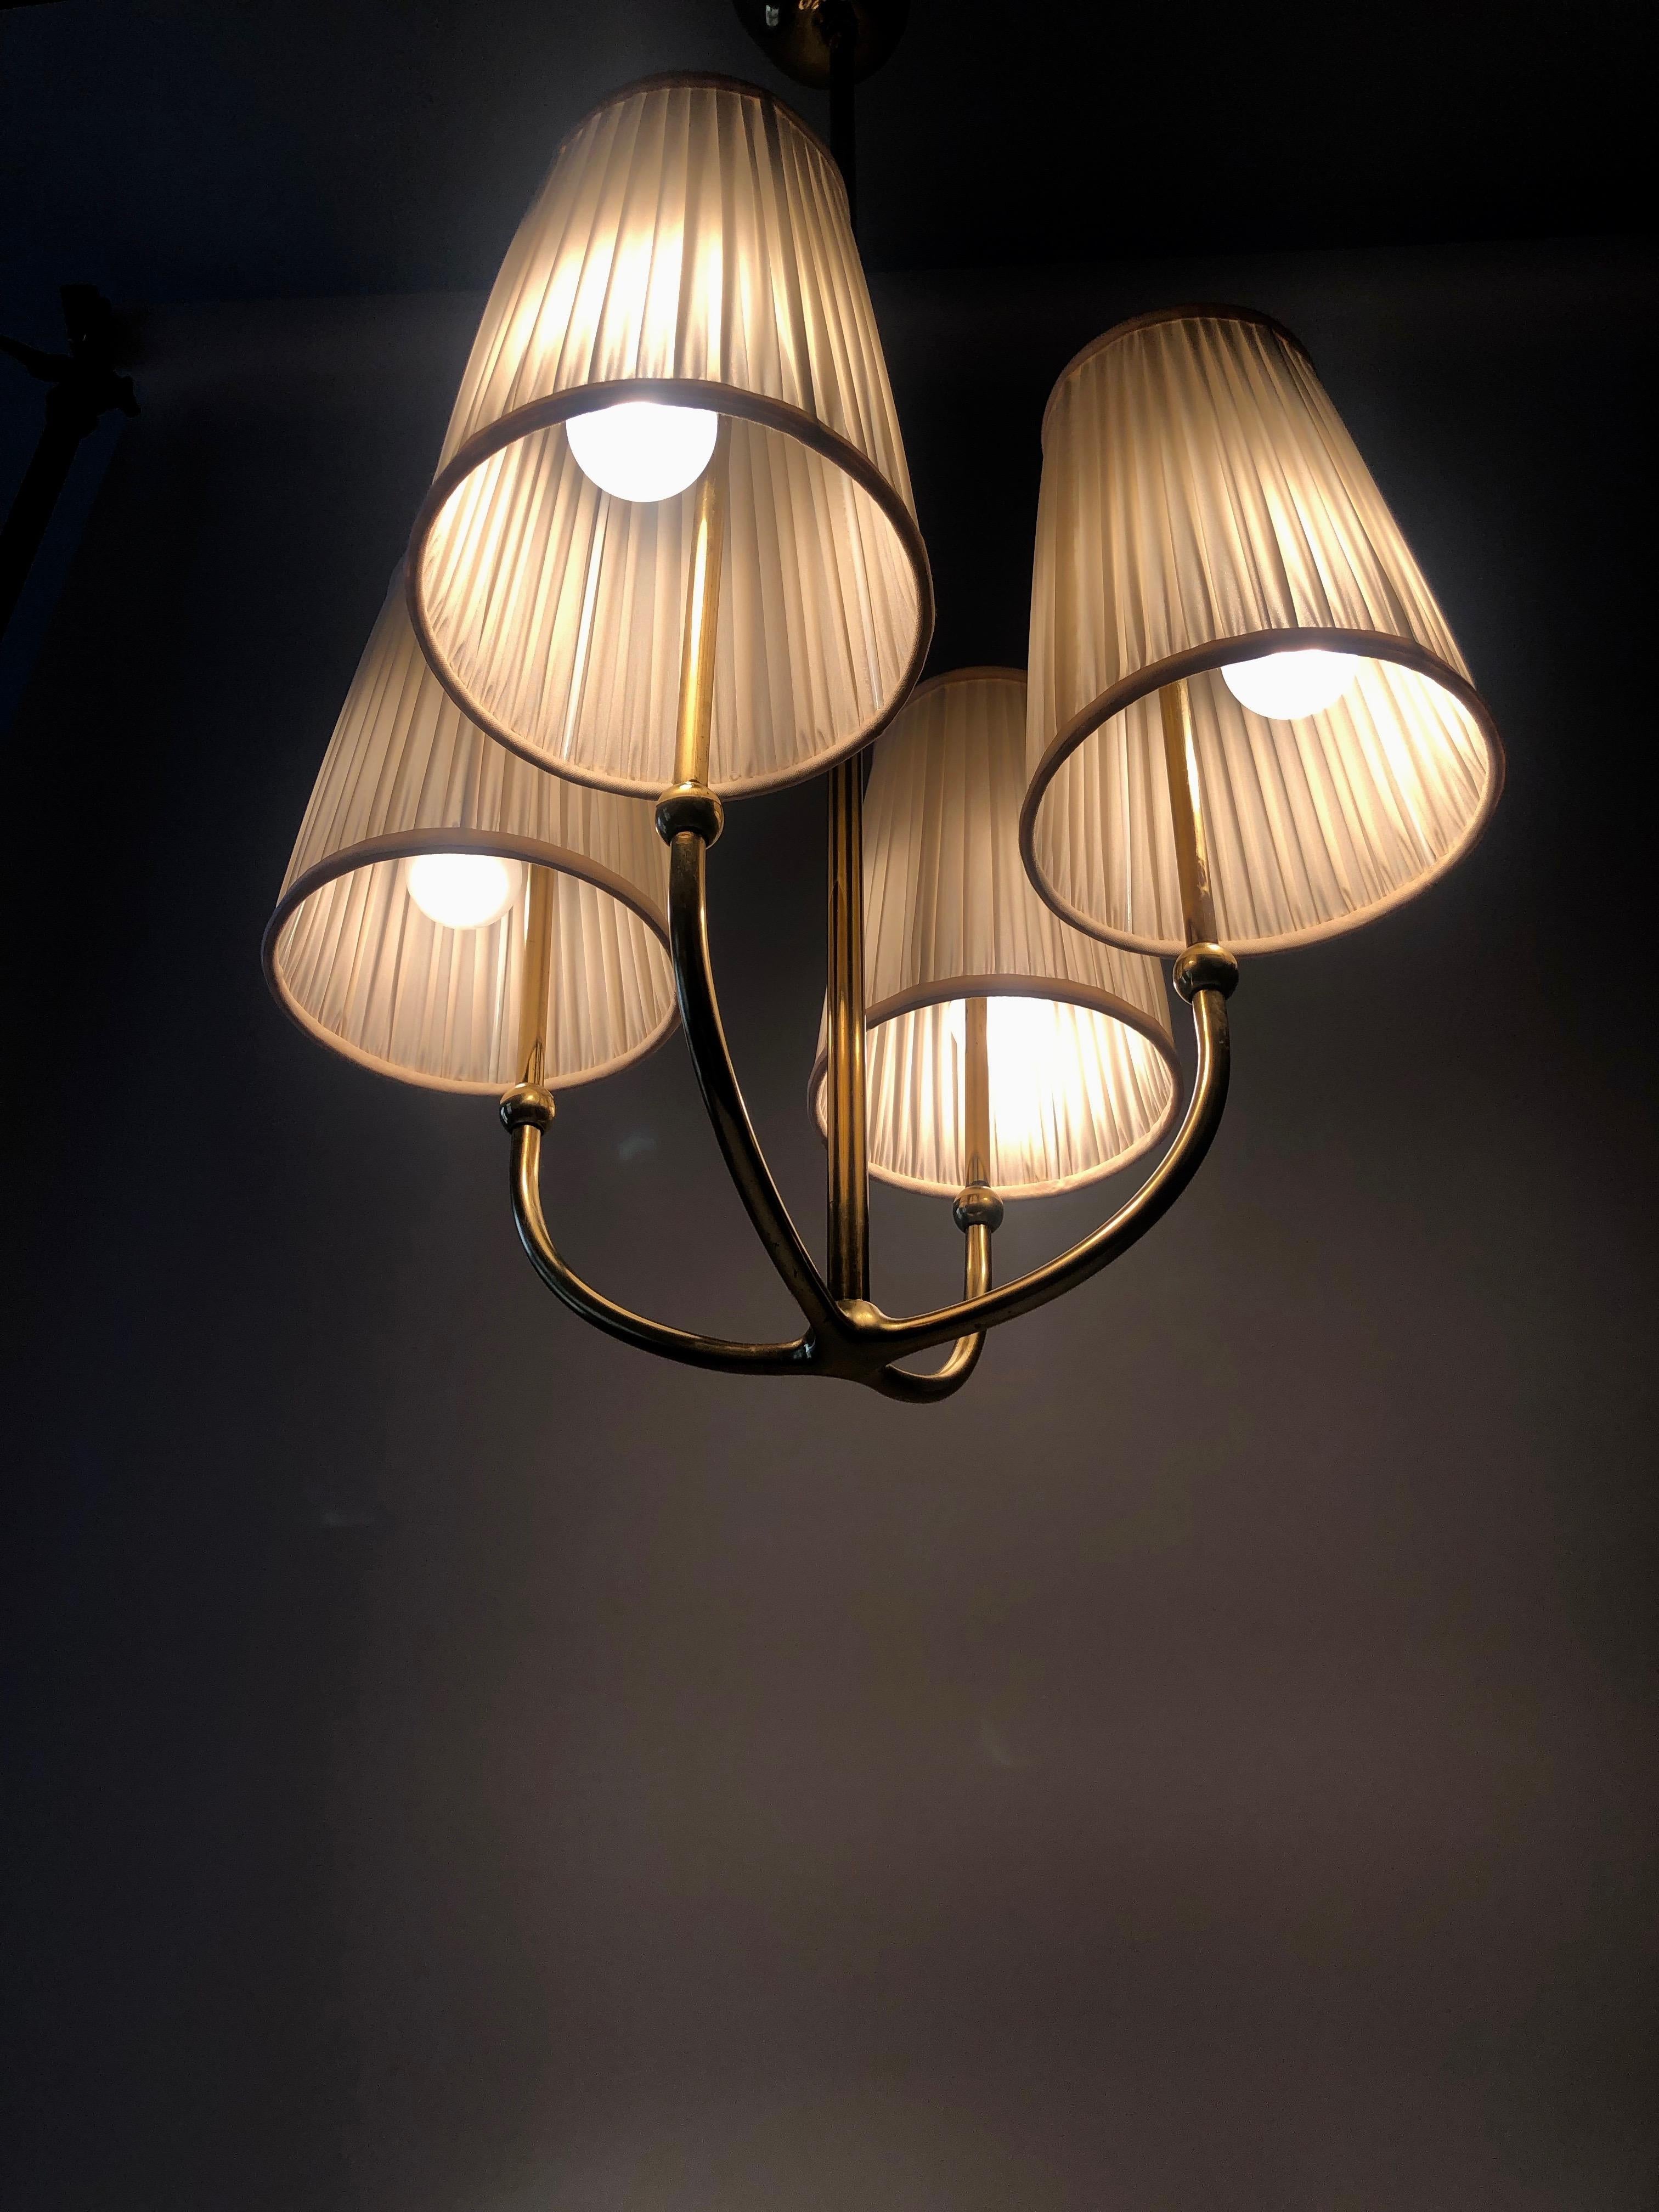 Four Arm Chandelier in Brass with Silk Shades , 1930's, Austria For Sale 3